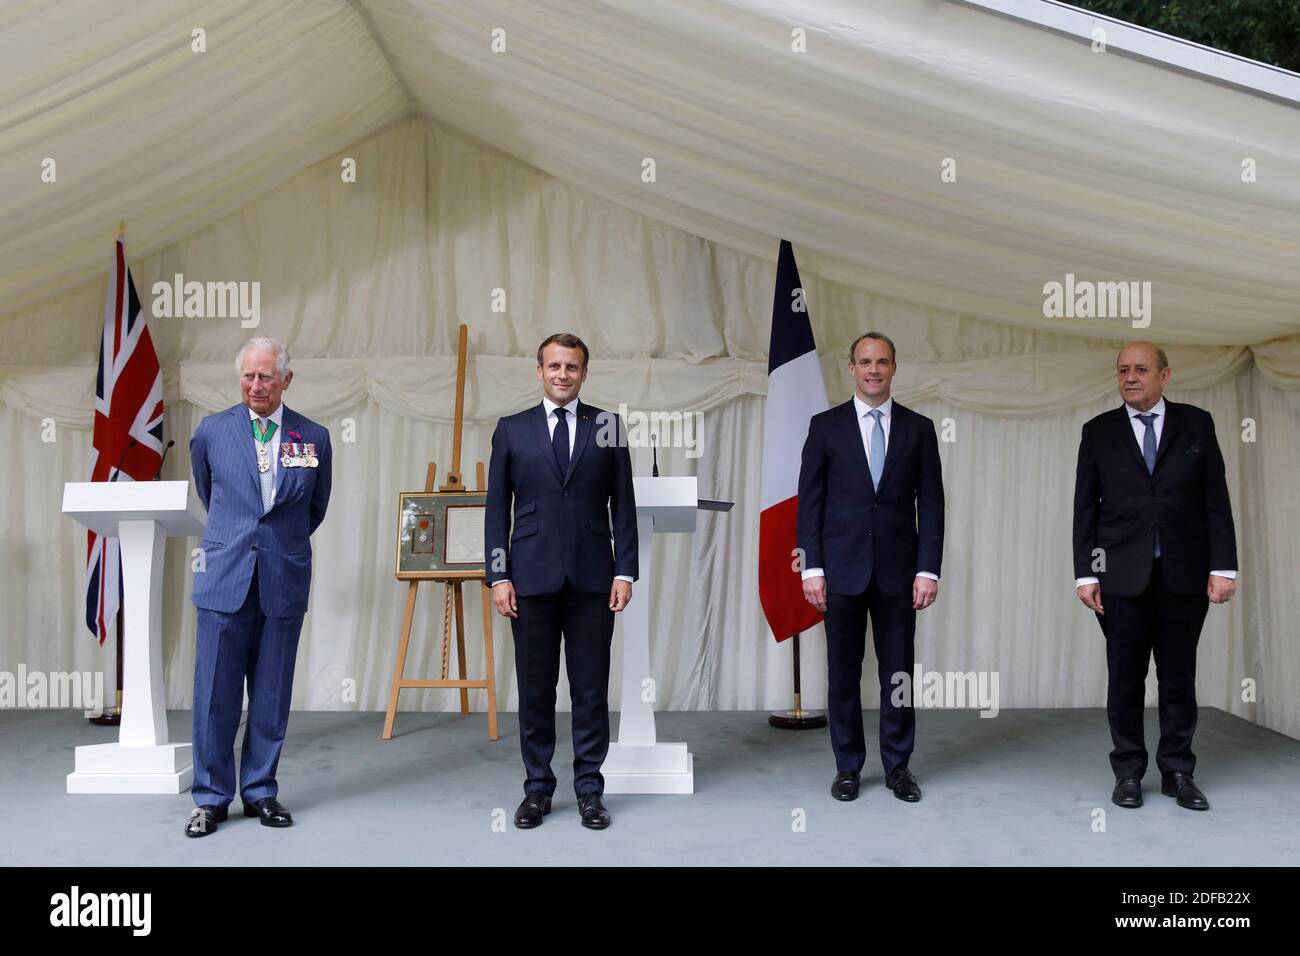 Britain's Prince Charles, Prince of Wales (L) French President Emmanuel Macron (2nd L), Britain's Foreign Secretary Dominic Raab (2nd R) and French Foreign Minister Jean-Yves Le Drian (R) stand after a ceremony to present the Legion d'Honneur – France's highest distinction – to London for services during WW2 at Carlton Gardens in central London on June 18, 2020 during a visit to mark the anniversary of former de Gaulle's appeal to French people to resist the Nazi occupation. - Macron visited London on June 18 to commemorate the 80th anniversary of former French president Charles de Gaulle's ap Stock Photo